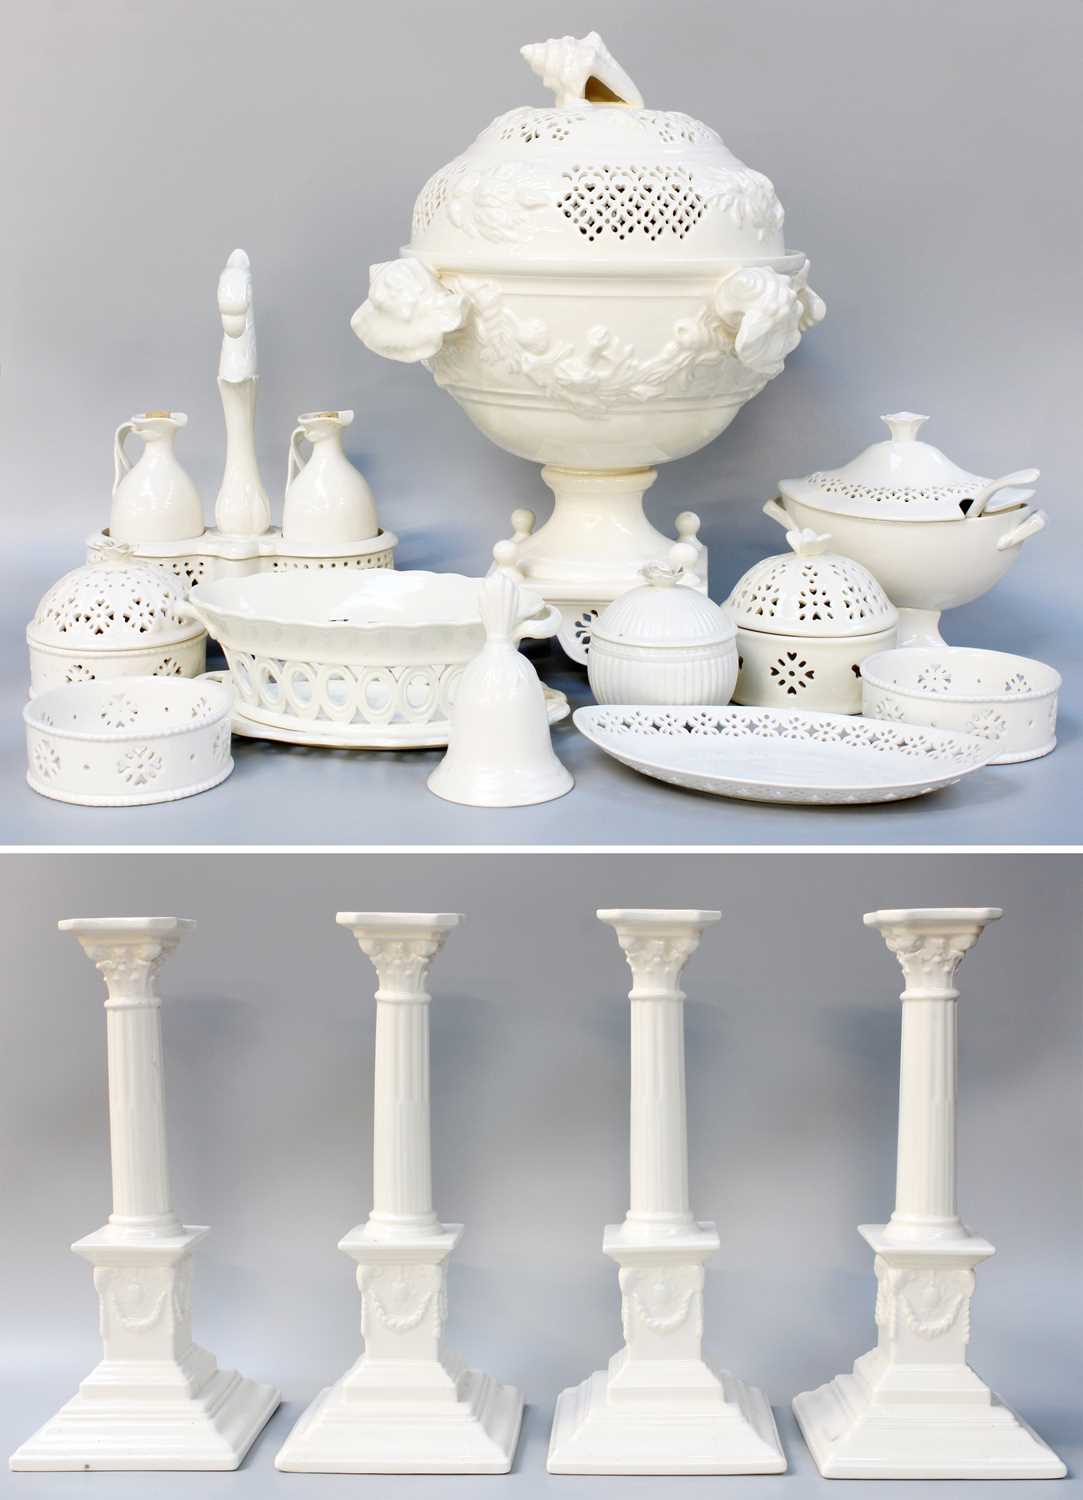 A Collection of Royal Creamware, in 18th century style, including large pieced tureen, set of four